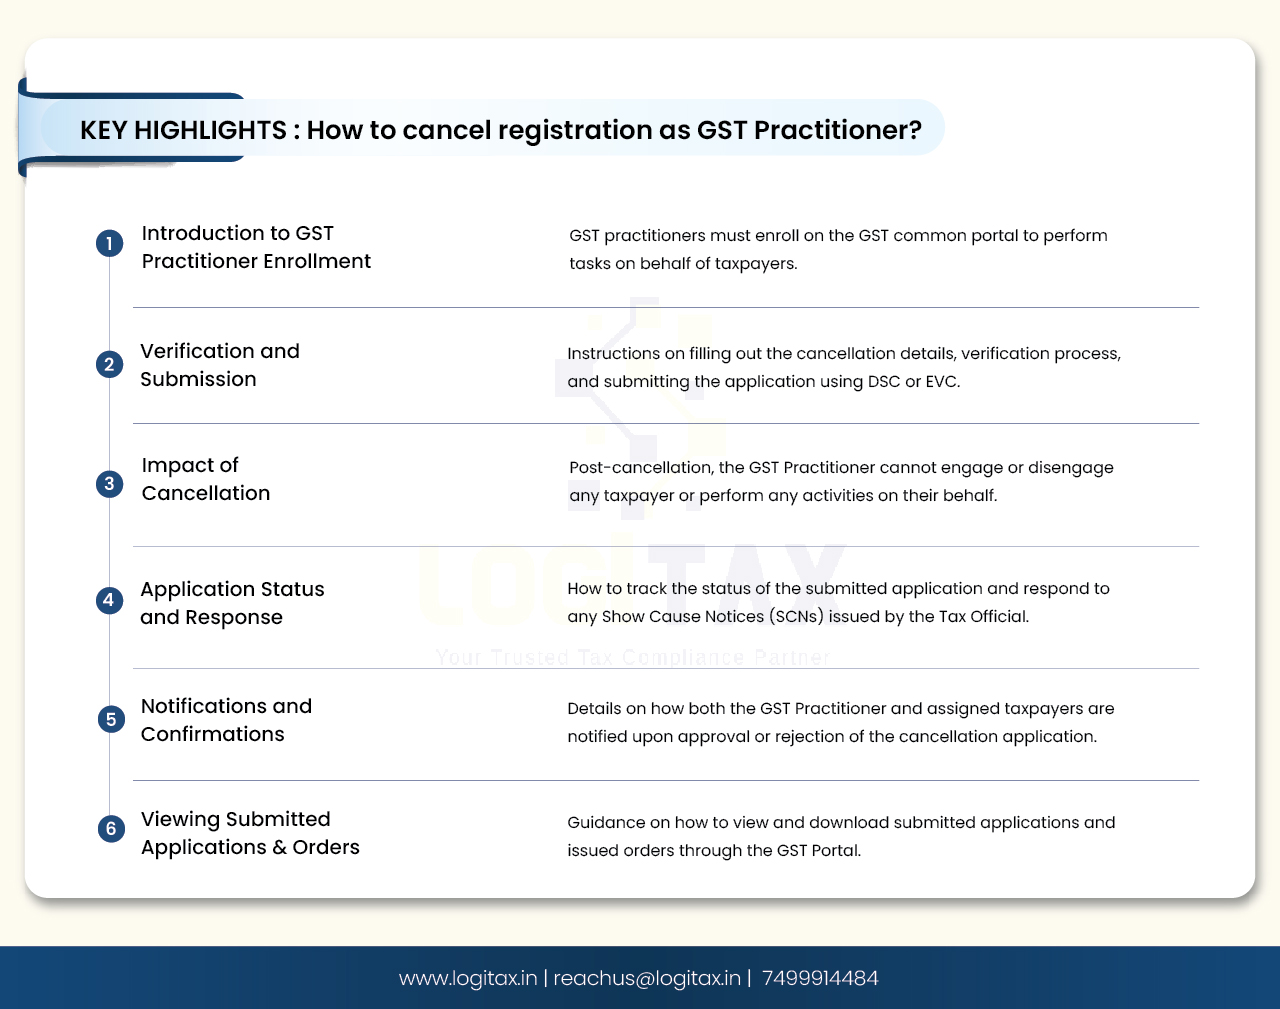 How to cancel registration as GST Practitioner?